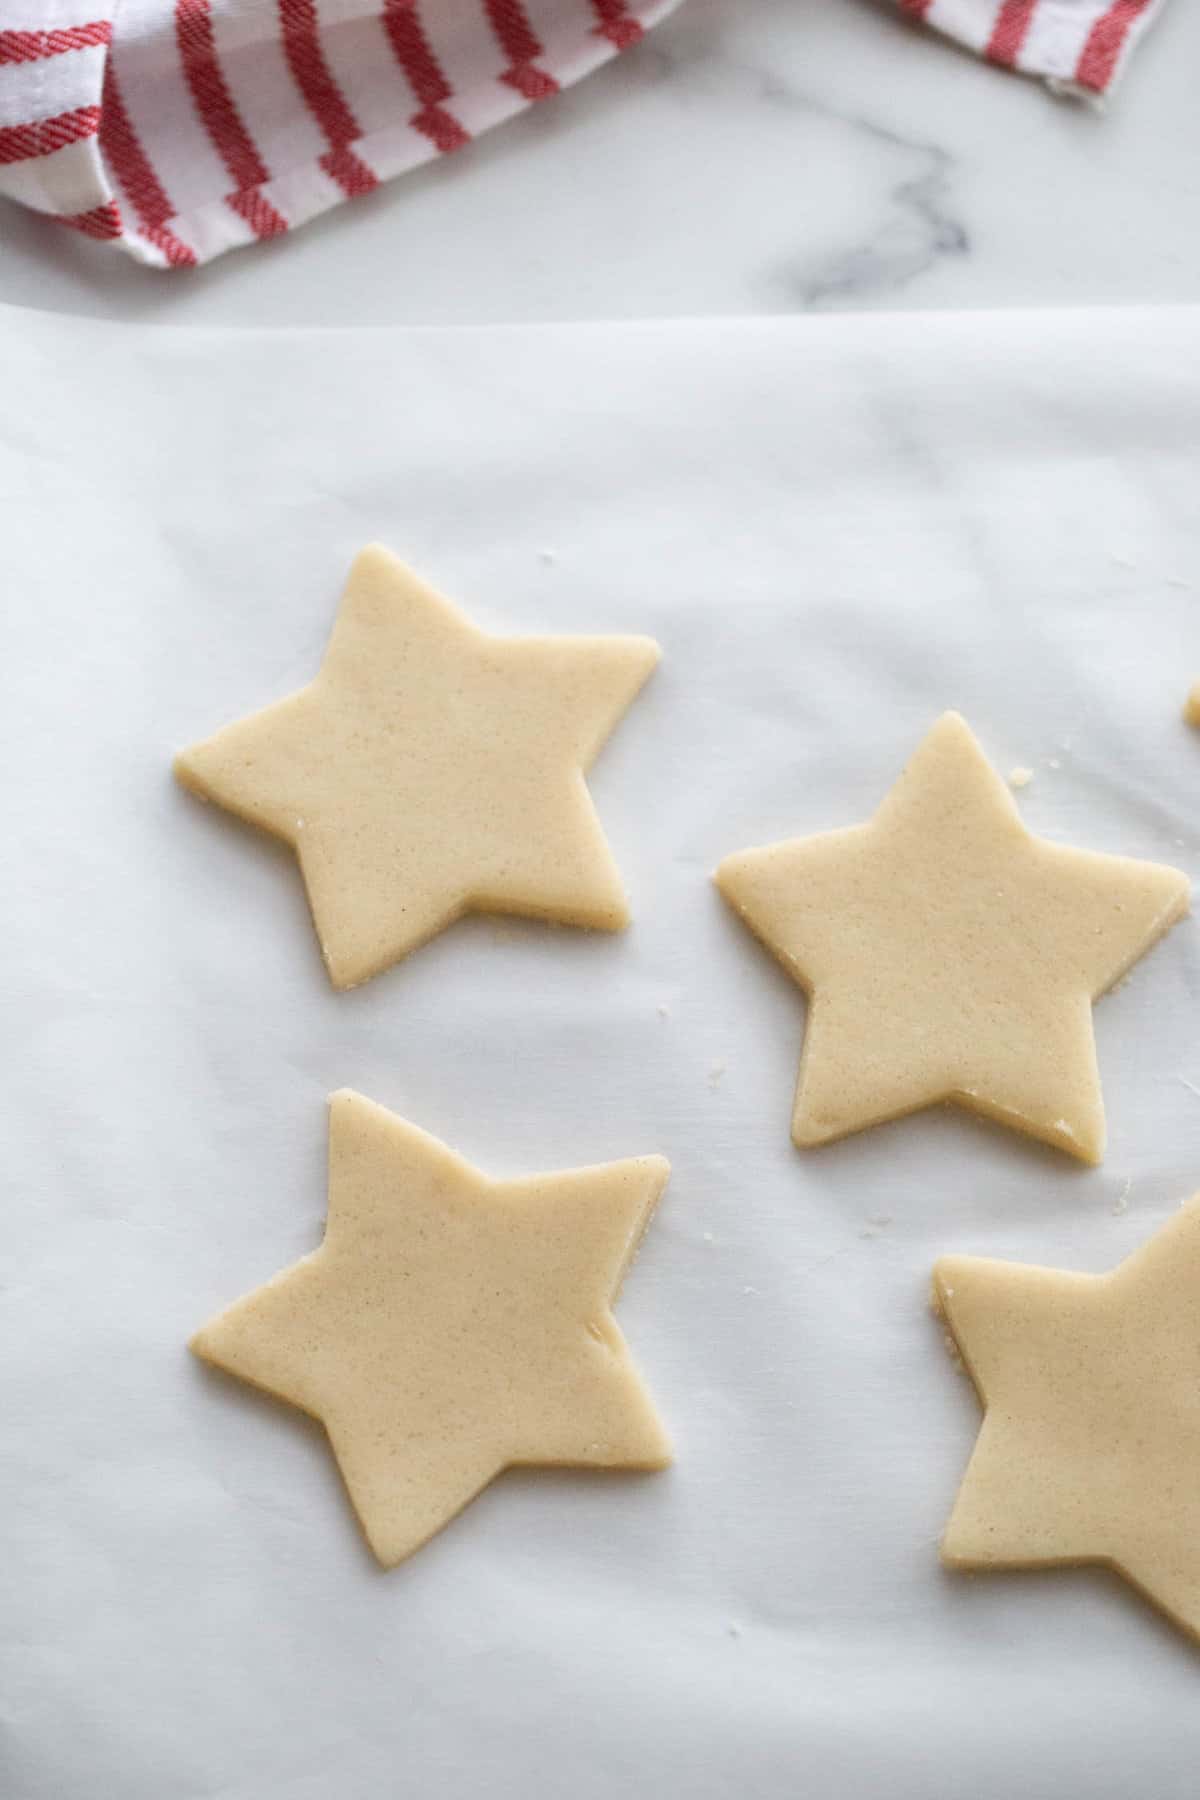 Four gluten-free sugar cookies on parchment paper before baking.